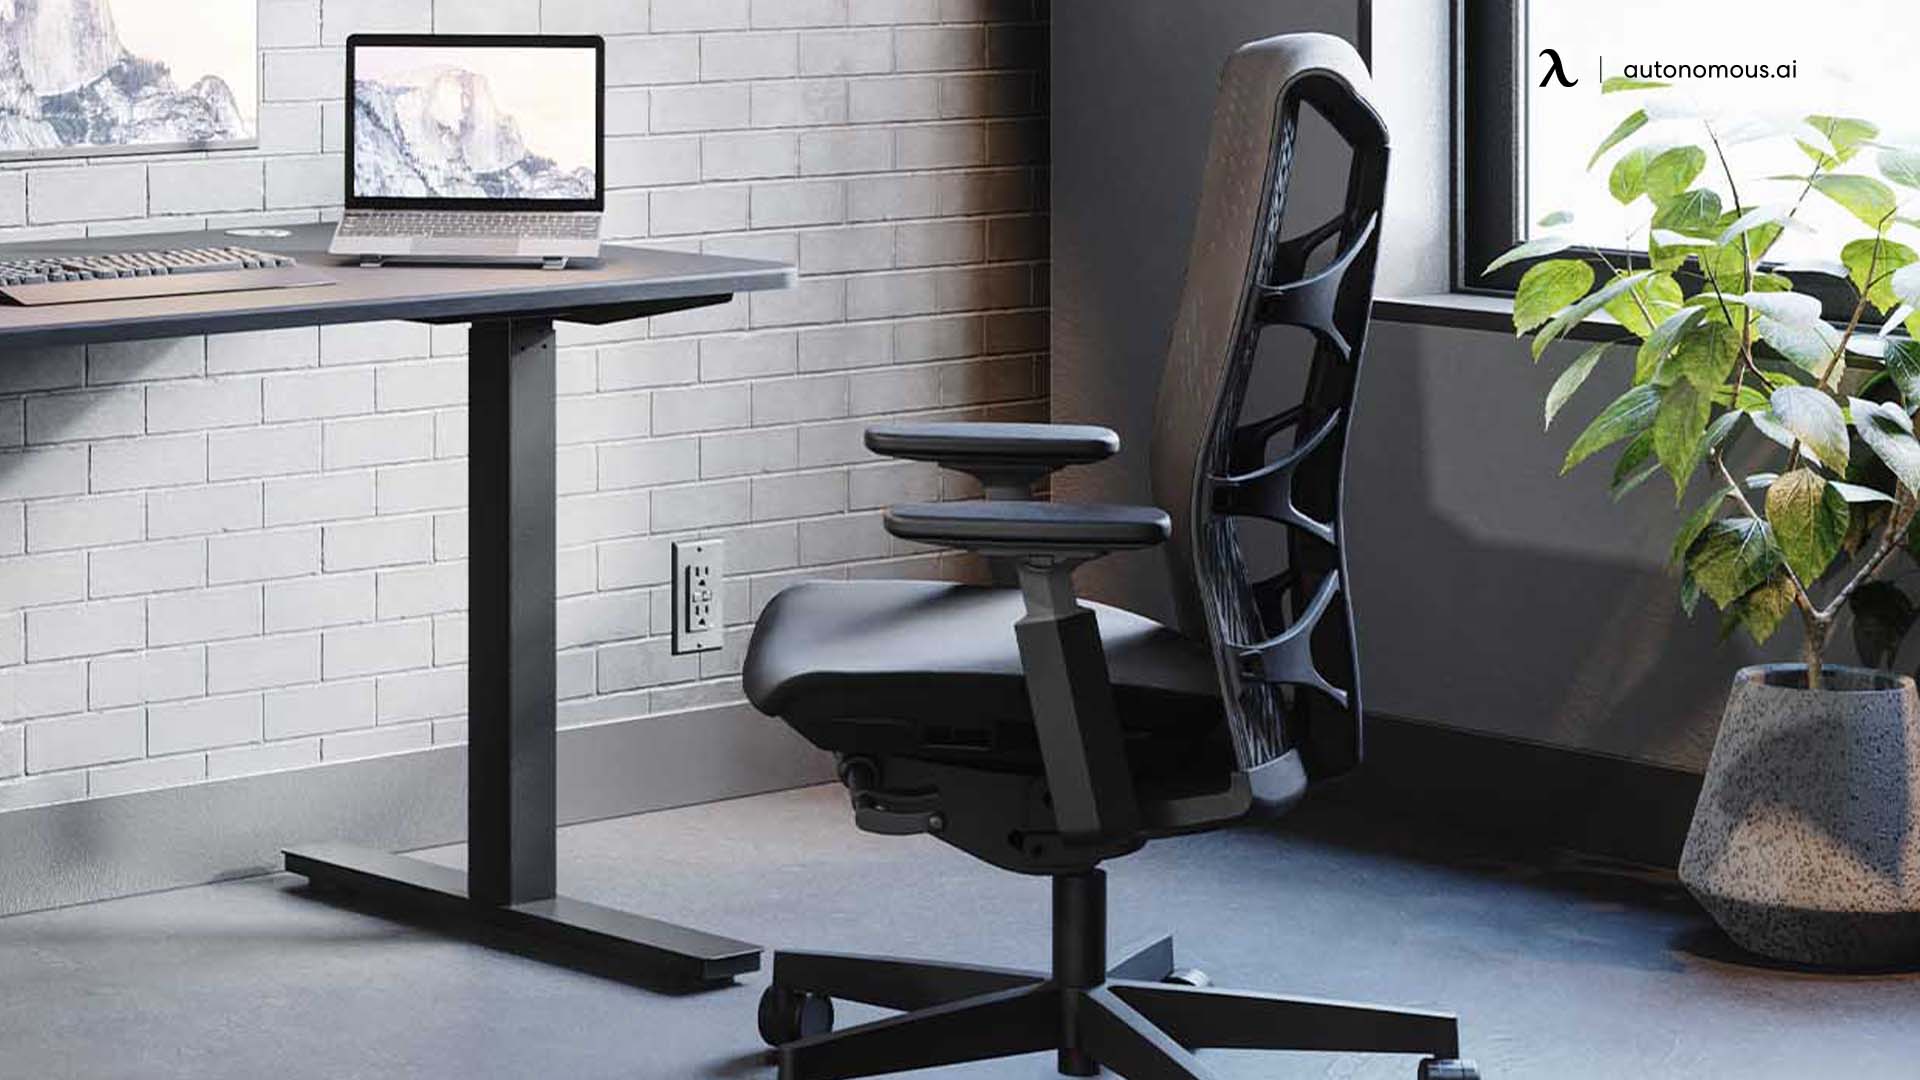 Black Friday Swivel Chair On Sale: Top 20 Choices on Budget